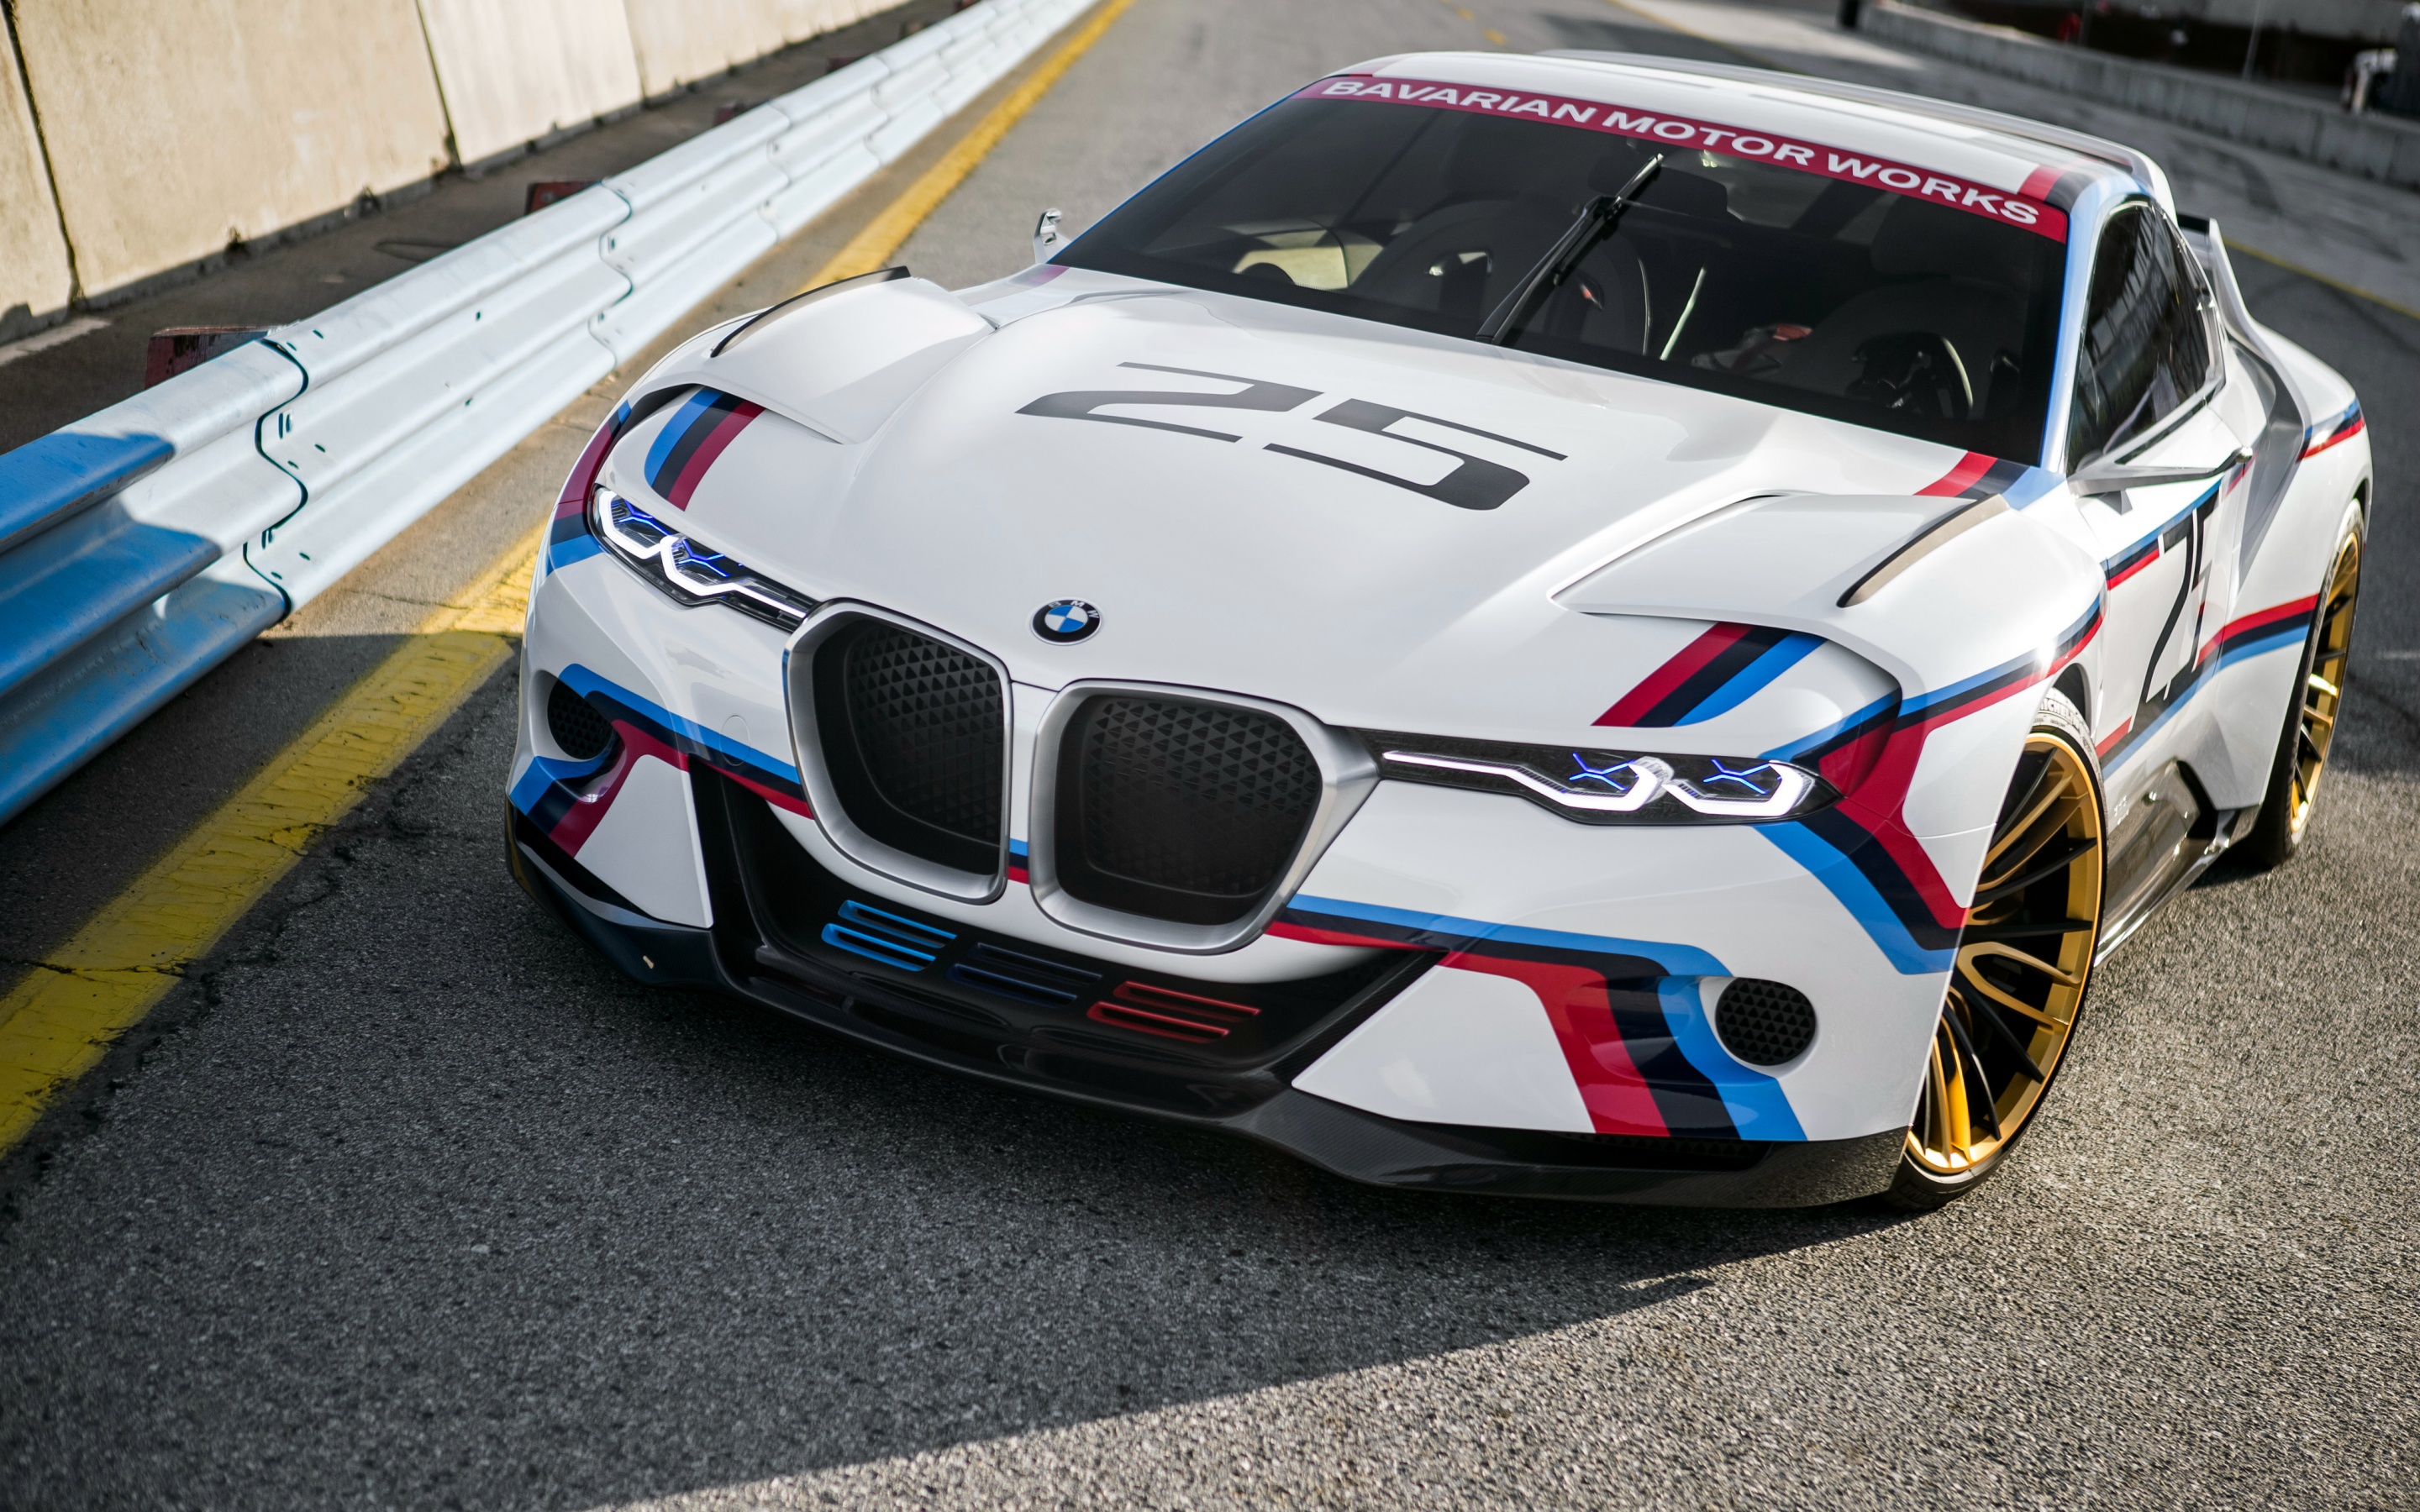 BMW 3.0 CSL Hommage R Wallpaper 4K, Racing cars, Supercars